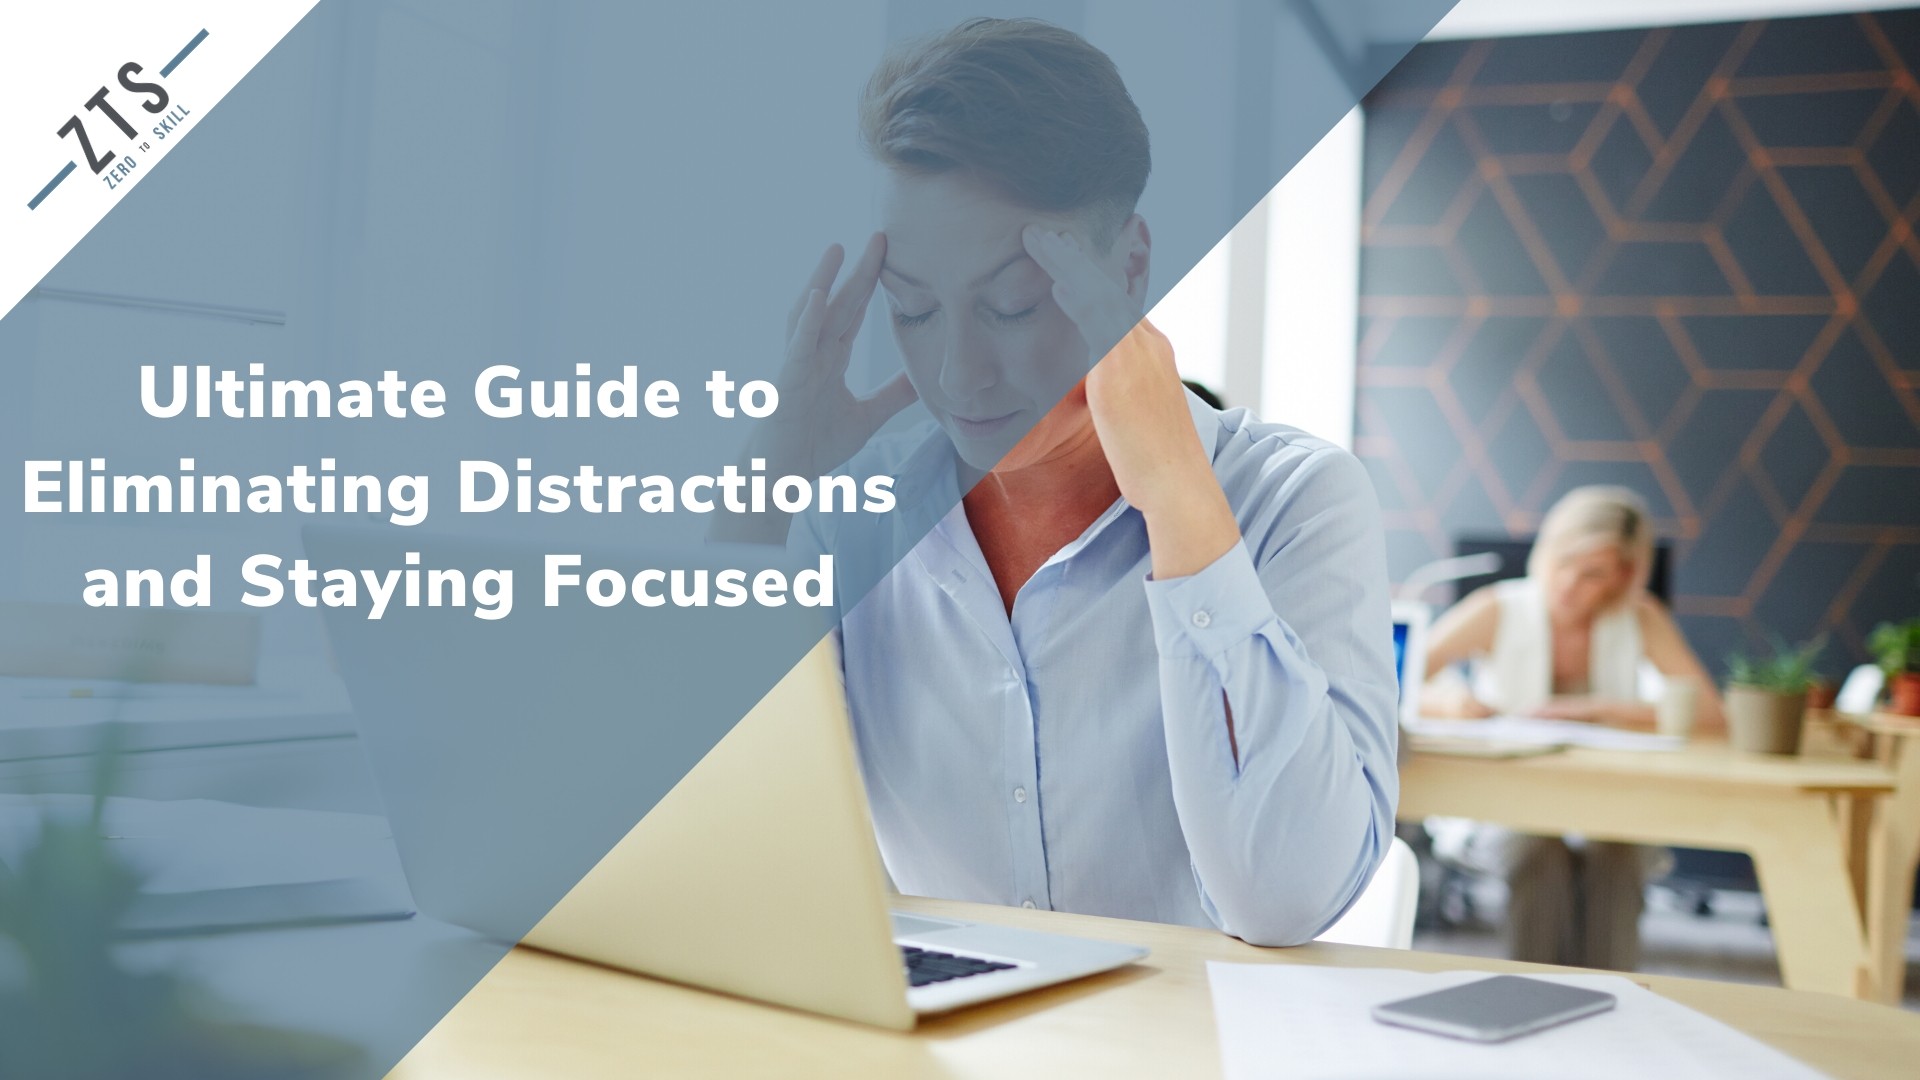 The Ultimate Guide to Eliminating Distractions and Staying Focused